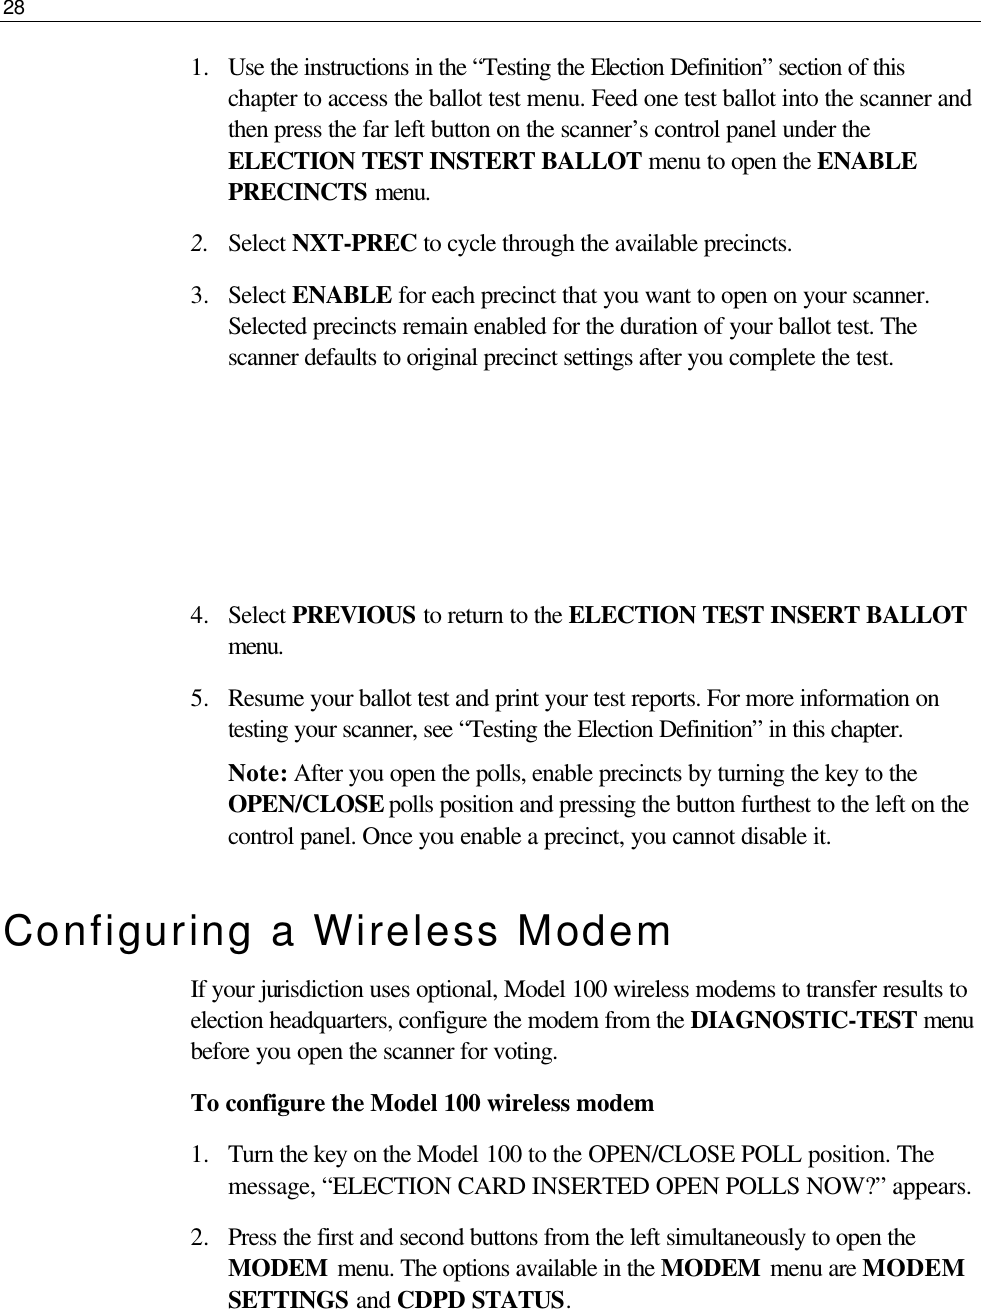 28  1.  Use the instructions in the “Testing the Election Definition” section of this chapter to access the ballot test menu. Feed one test ballot into the scanner and then press the far left button on the scanner’s control panel under the ELECTION TEST INSTERT BALLOT menu to open the ENABLE PRECINCTS menu.  2.  Select NXT-PREC to cycle through the available precincts.  3.  Select ENABLE for each precinct that you want to open on your scanner. Selected precincts remain enabled for the duration of your ballot test. The scanner defaults to original precinct settings after you complete the test.     4.  Select PREVIOUS to return to the ELECTION TEST INSERT BALLOT menu. 5.  Resume your ballot test and print your test reports. For more information on testing your scanner, see “Testing the Election Definition” in this chapter. Note: After you open the polls, enable precincts by turning the key to the OPEN/CLOSE polls position and pressing the button furthest to the left on the control panel. Once you enable a precinct, you cannot disable it. Configuring a Wireless Modem If your jurisdiction uses optional, Model 100 wireless modems to transfer results to election headquarters, configure the modem from the DIAGNOSTIC-TEST menu before you open the scanner for voting. To configure the Model 100 wireless modem 1.  Turn the key on the Model 100 to the OPEN/CLOSE POLL position. The message, “ELECTION CARD INSERTED OPEN POLLS NOW?” appears. 2.  Press the first and second buttons from the left simultaneously to open the MODEM menu. The options available in the MODEM menu are MODEM SETTINGS and CDPD STATUS. 